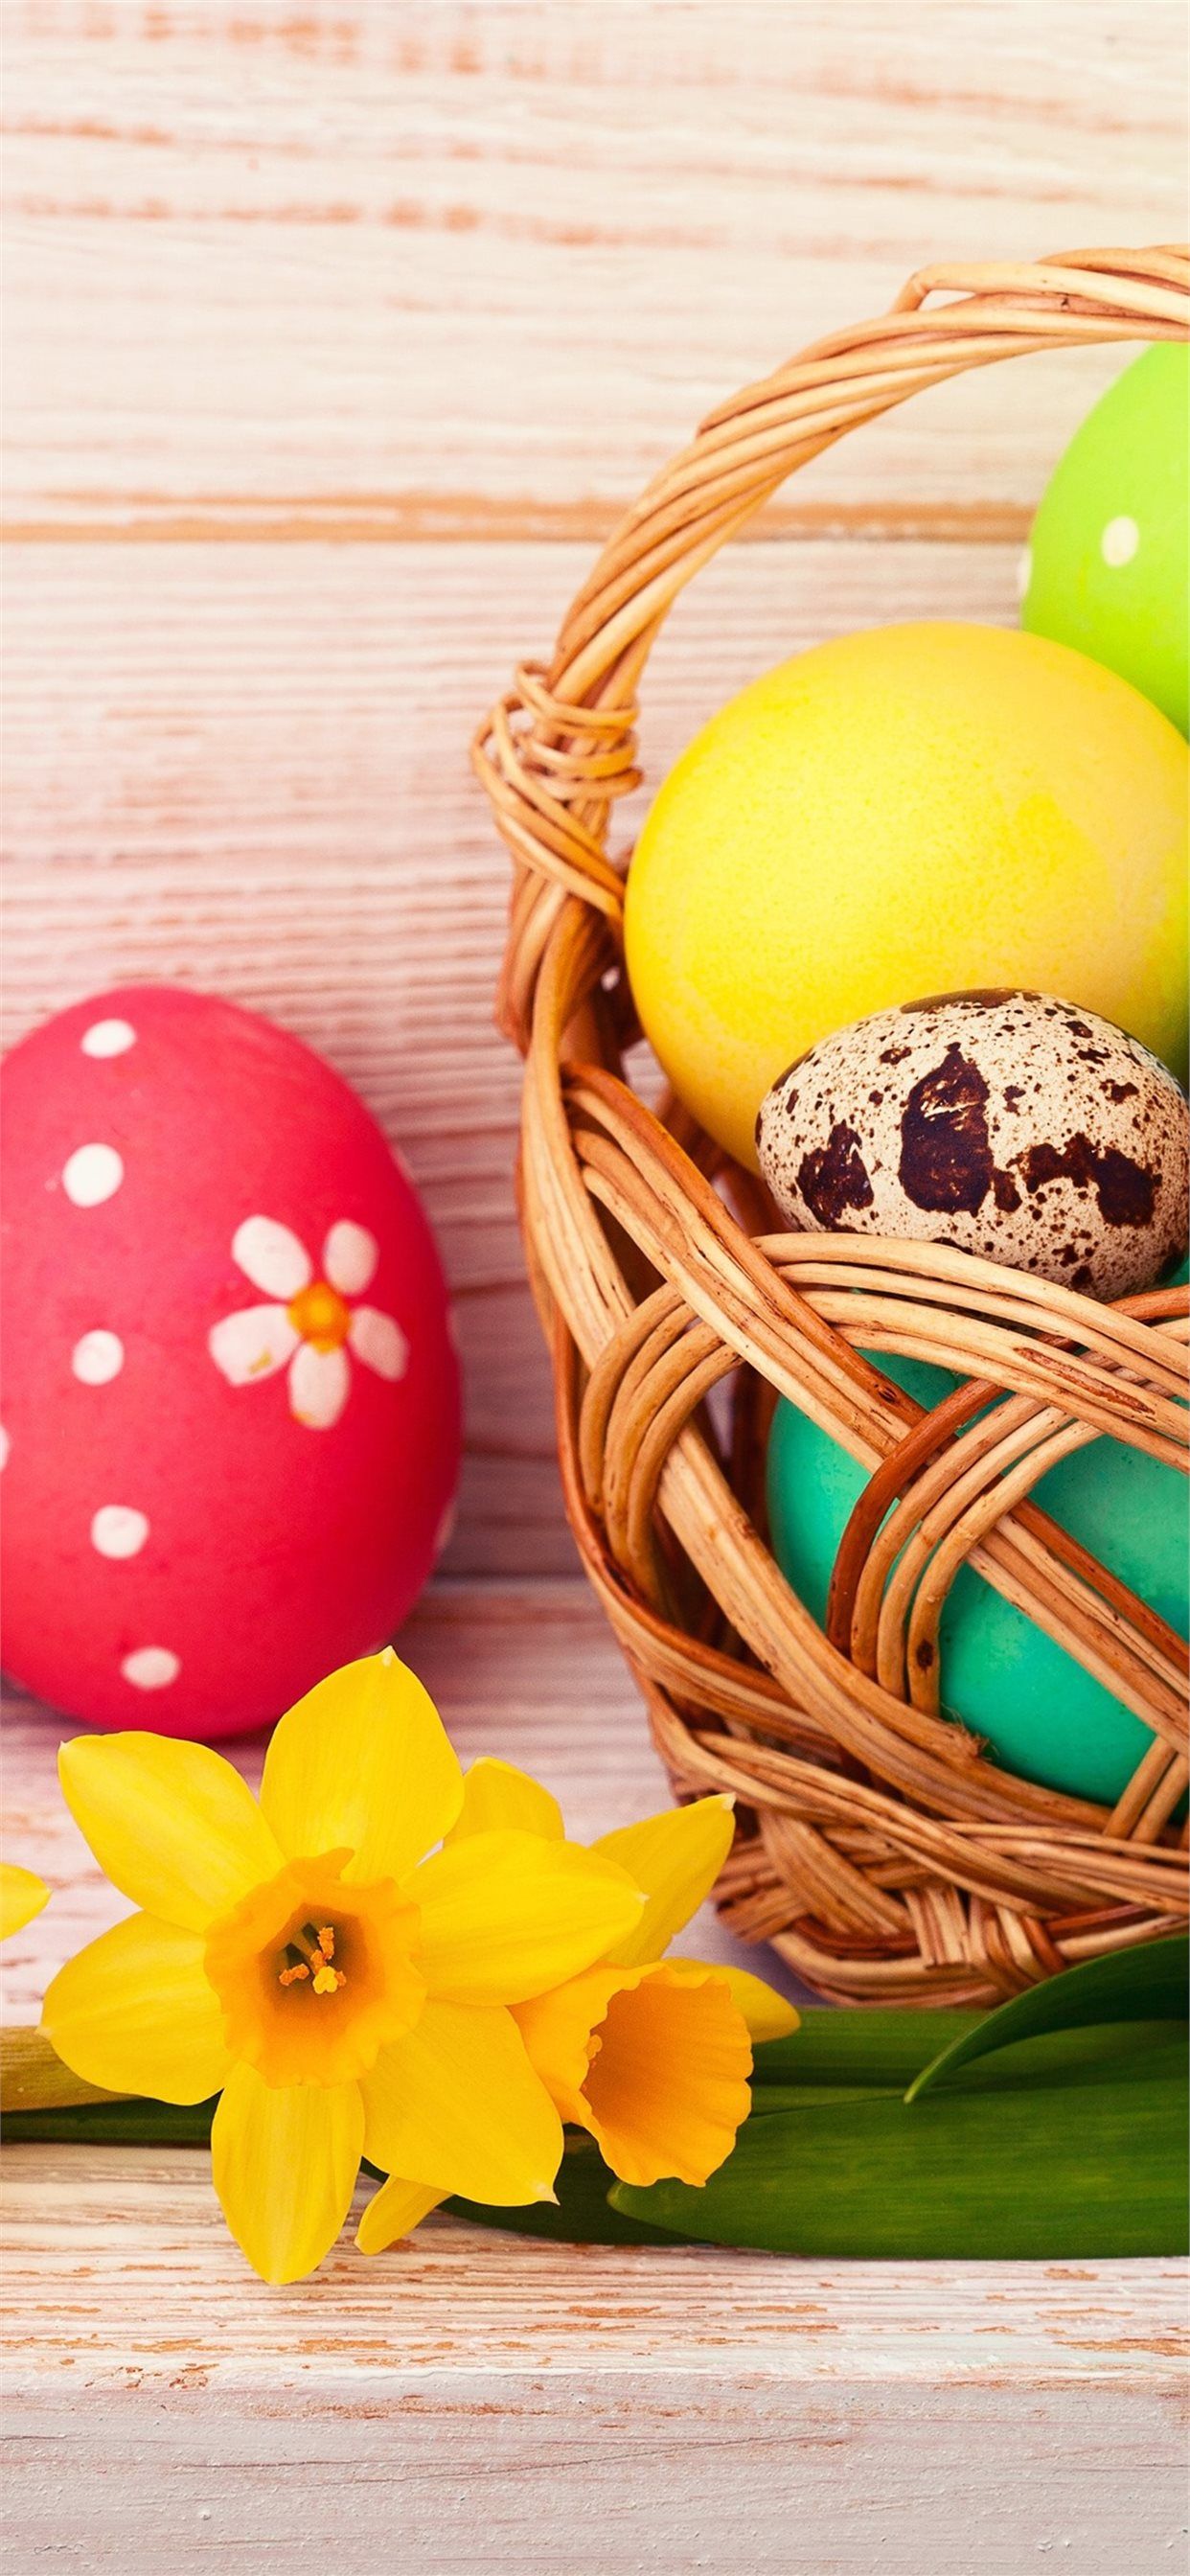 4K Happy Easter High Quality iPhone Wallpaper Free Download